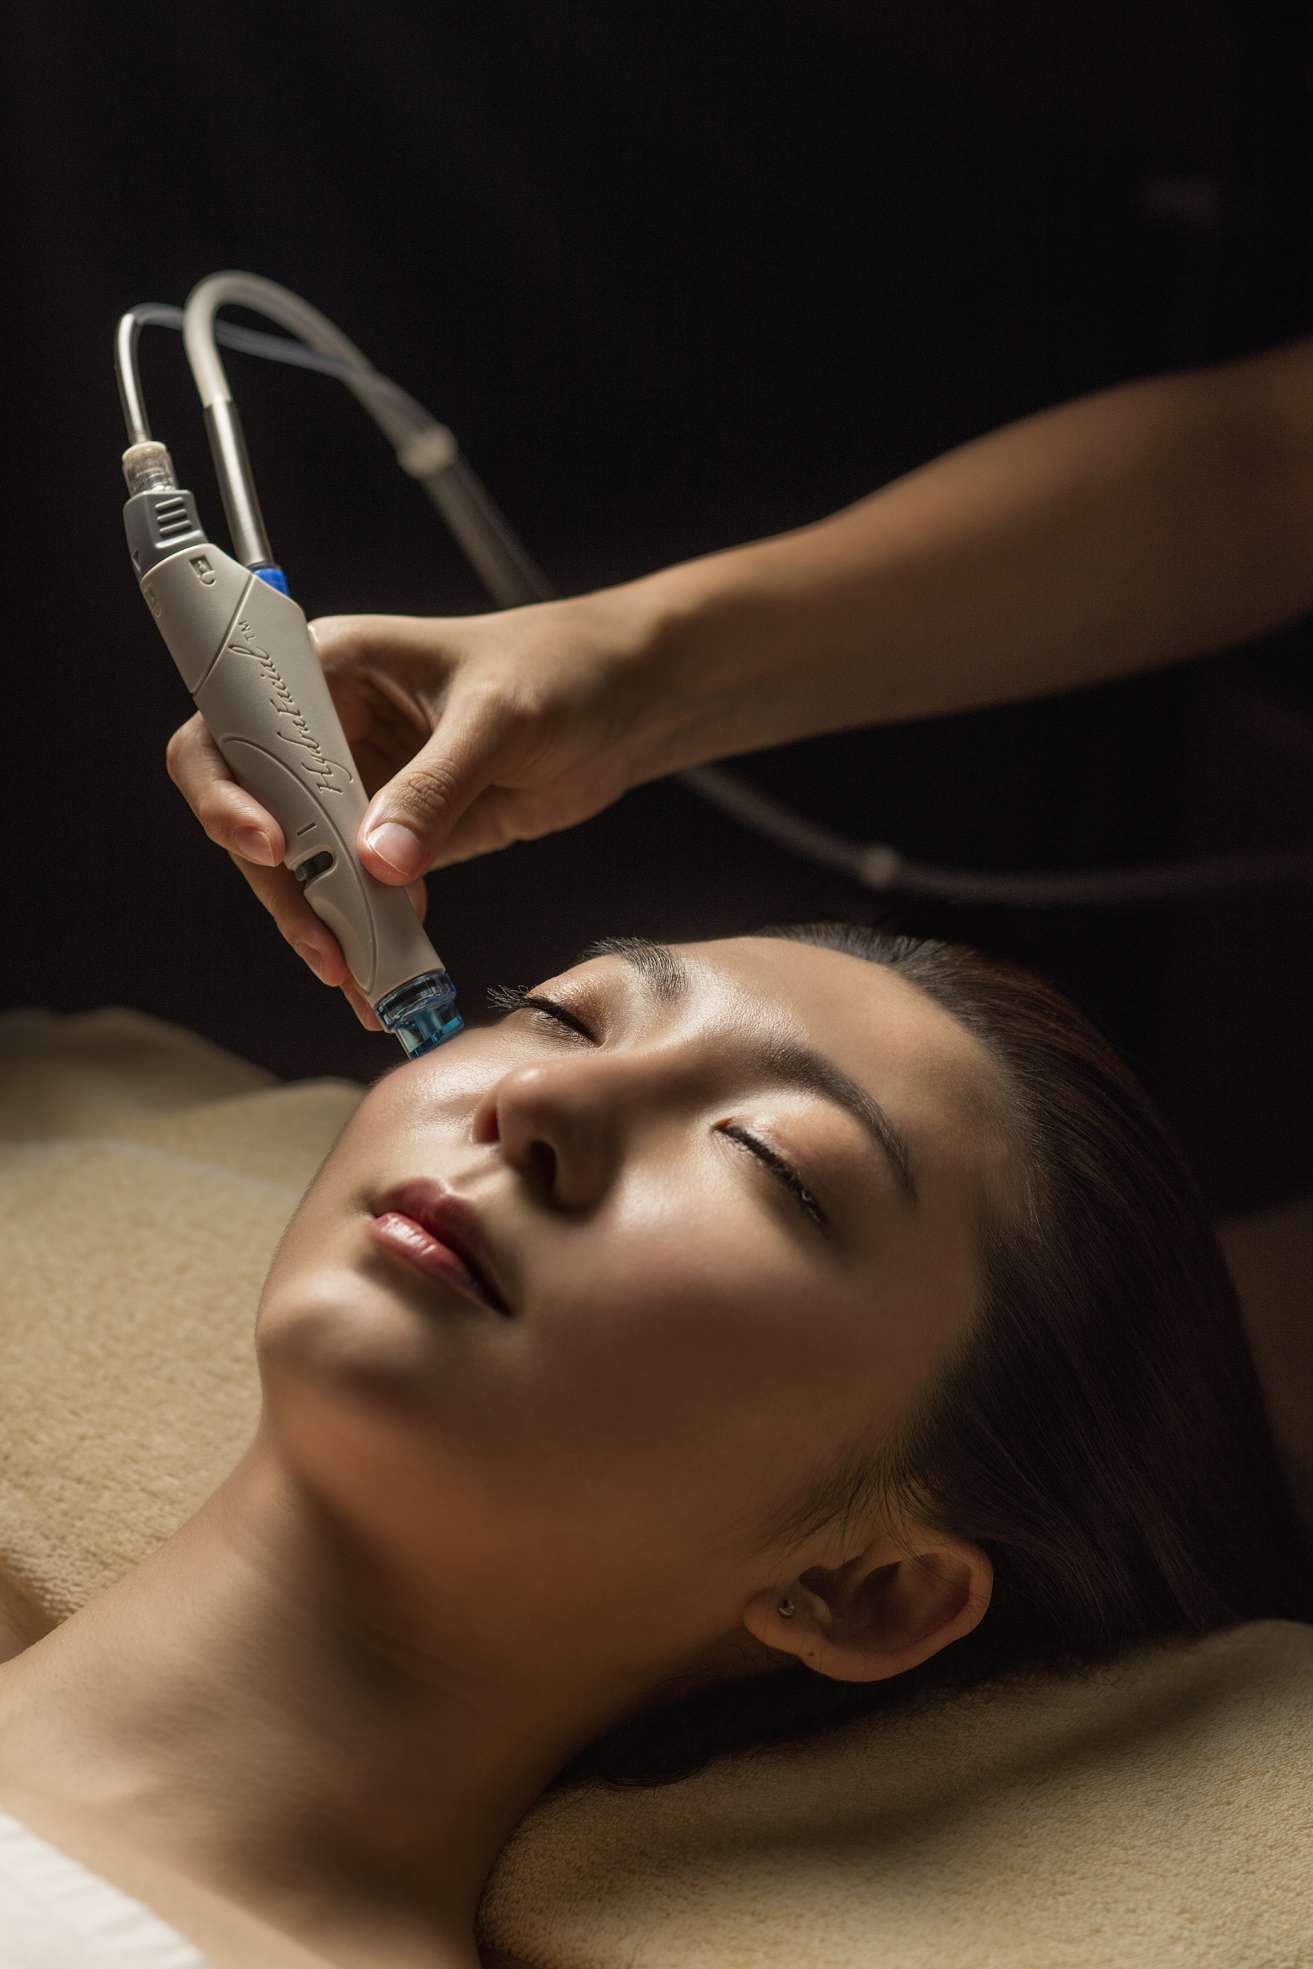 The Tria Spa at MGM Macau offers the latest HydraFacial MD technology to exfoliate and rejuvenate the skin.